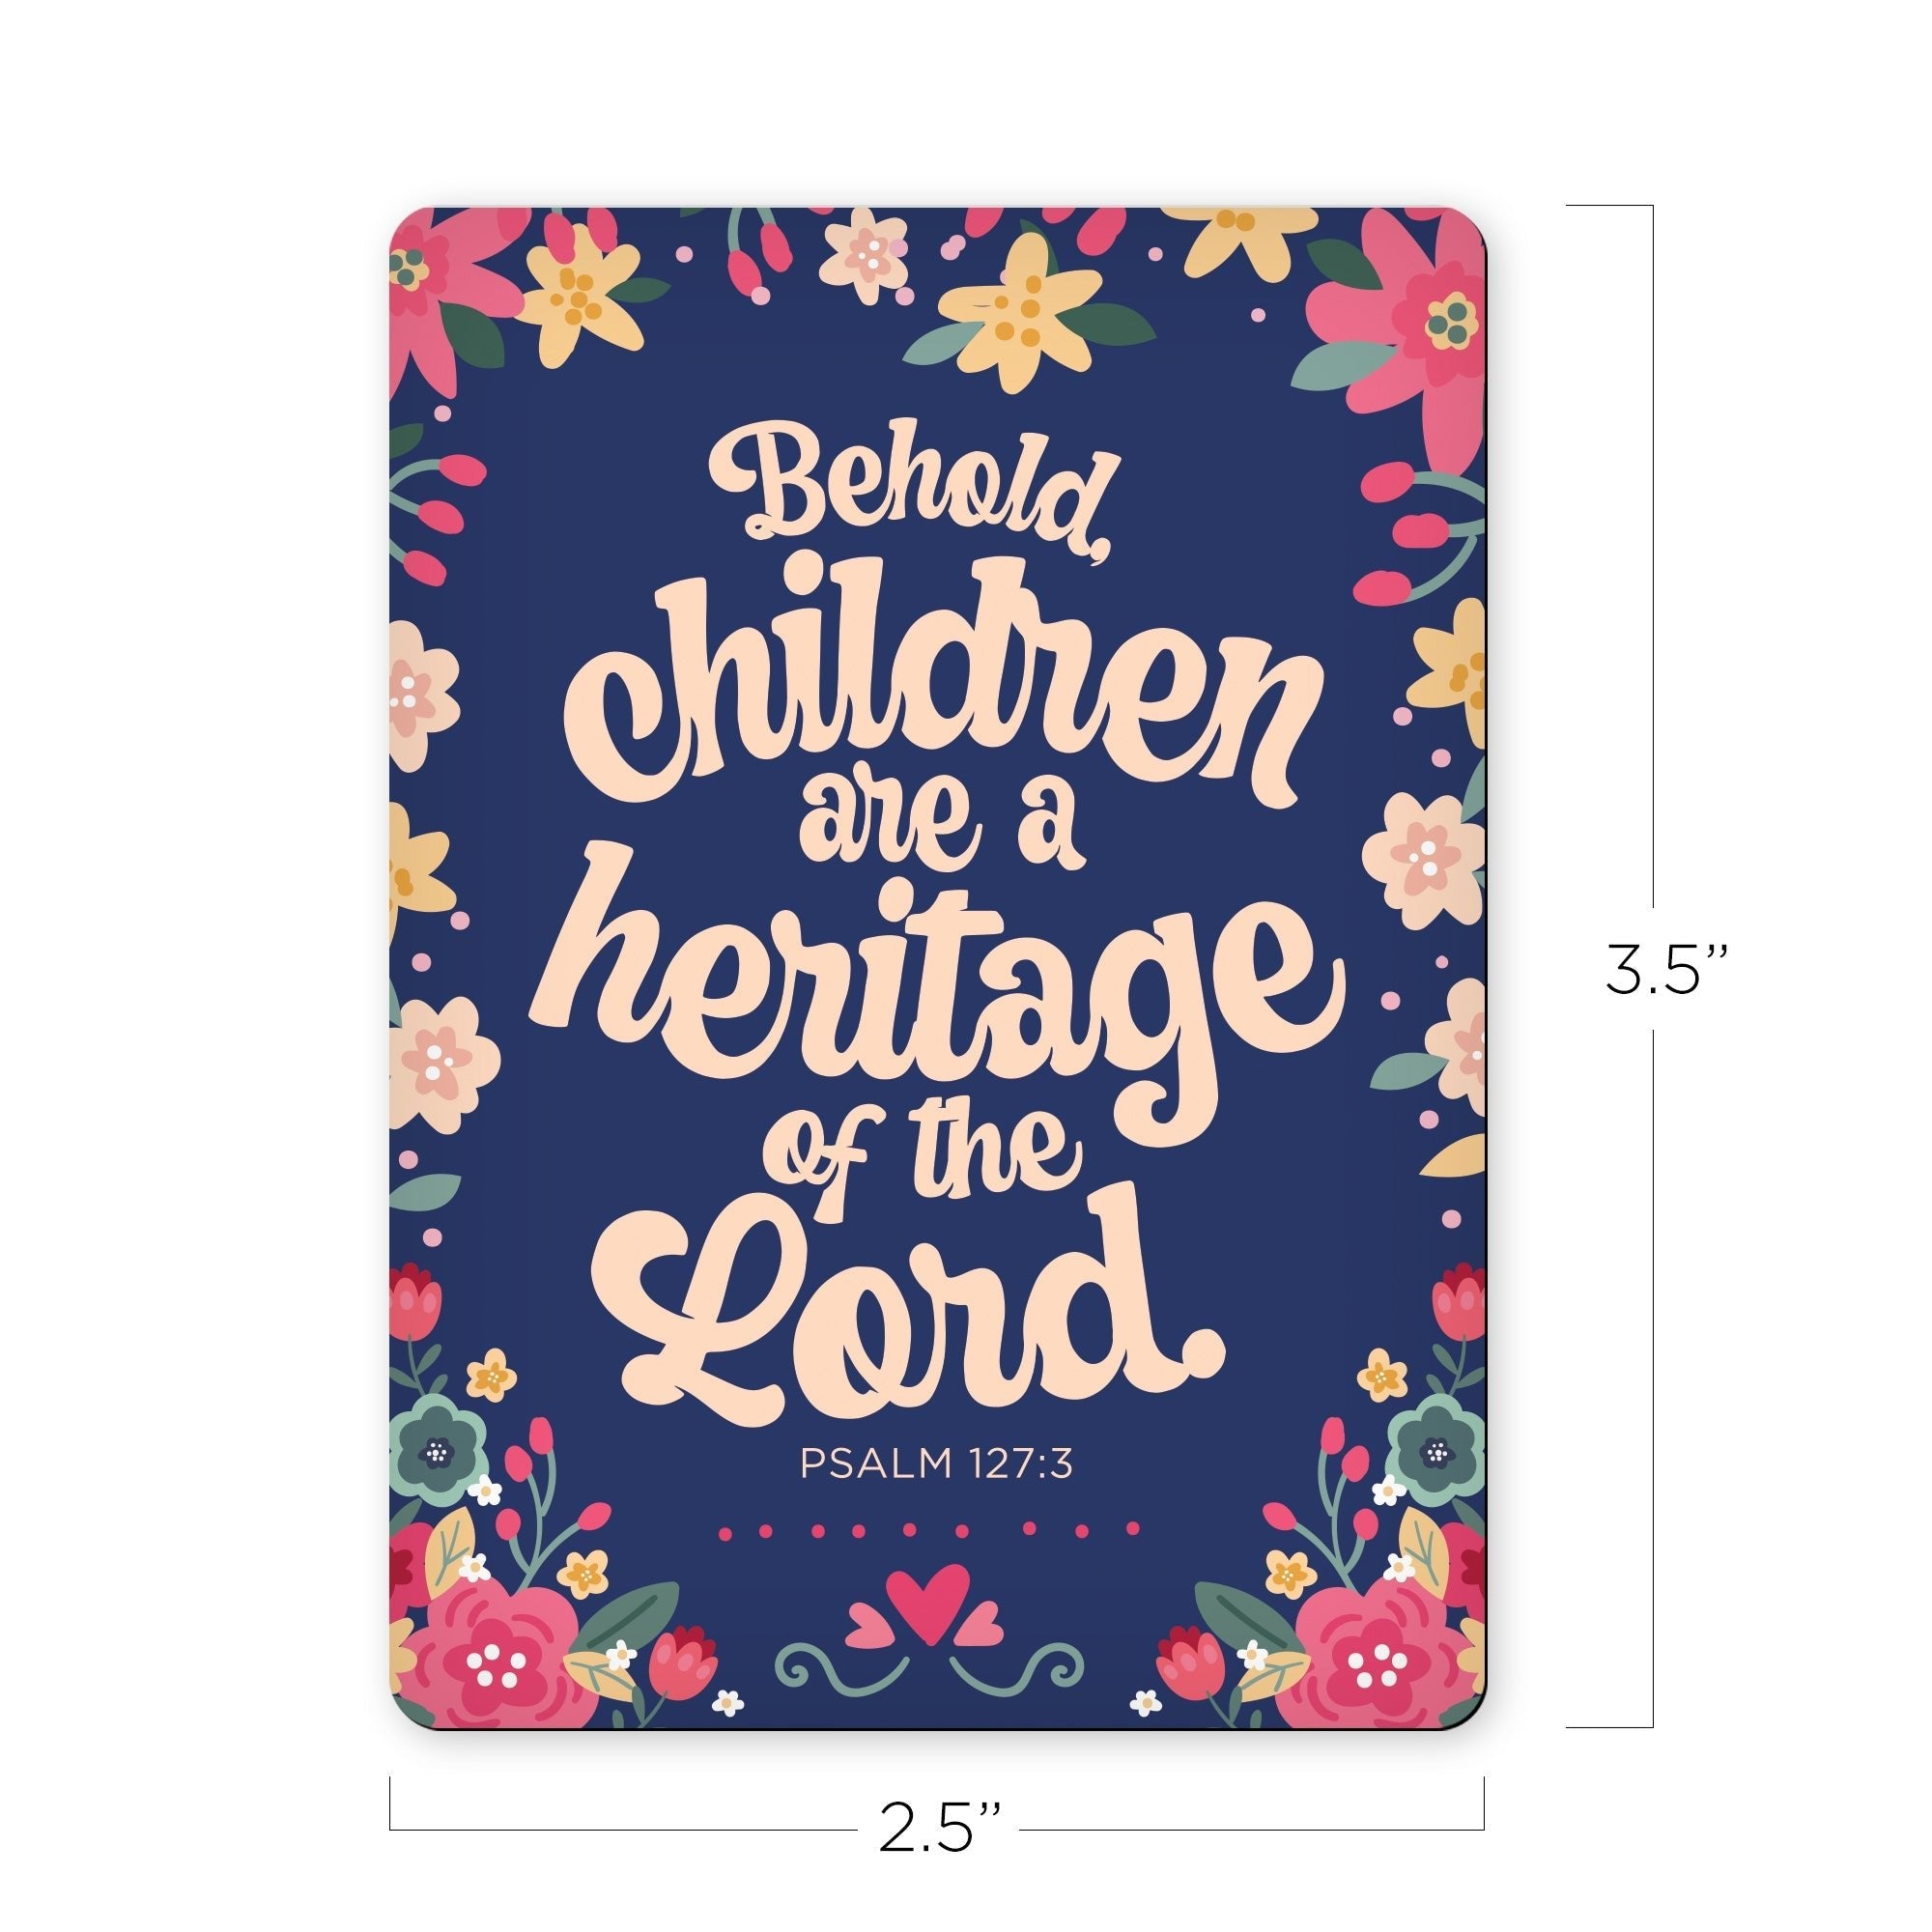 Children are a heritage of the Lord - Psalm 127:3 - Scripture Magnet